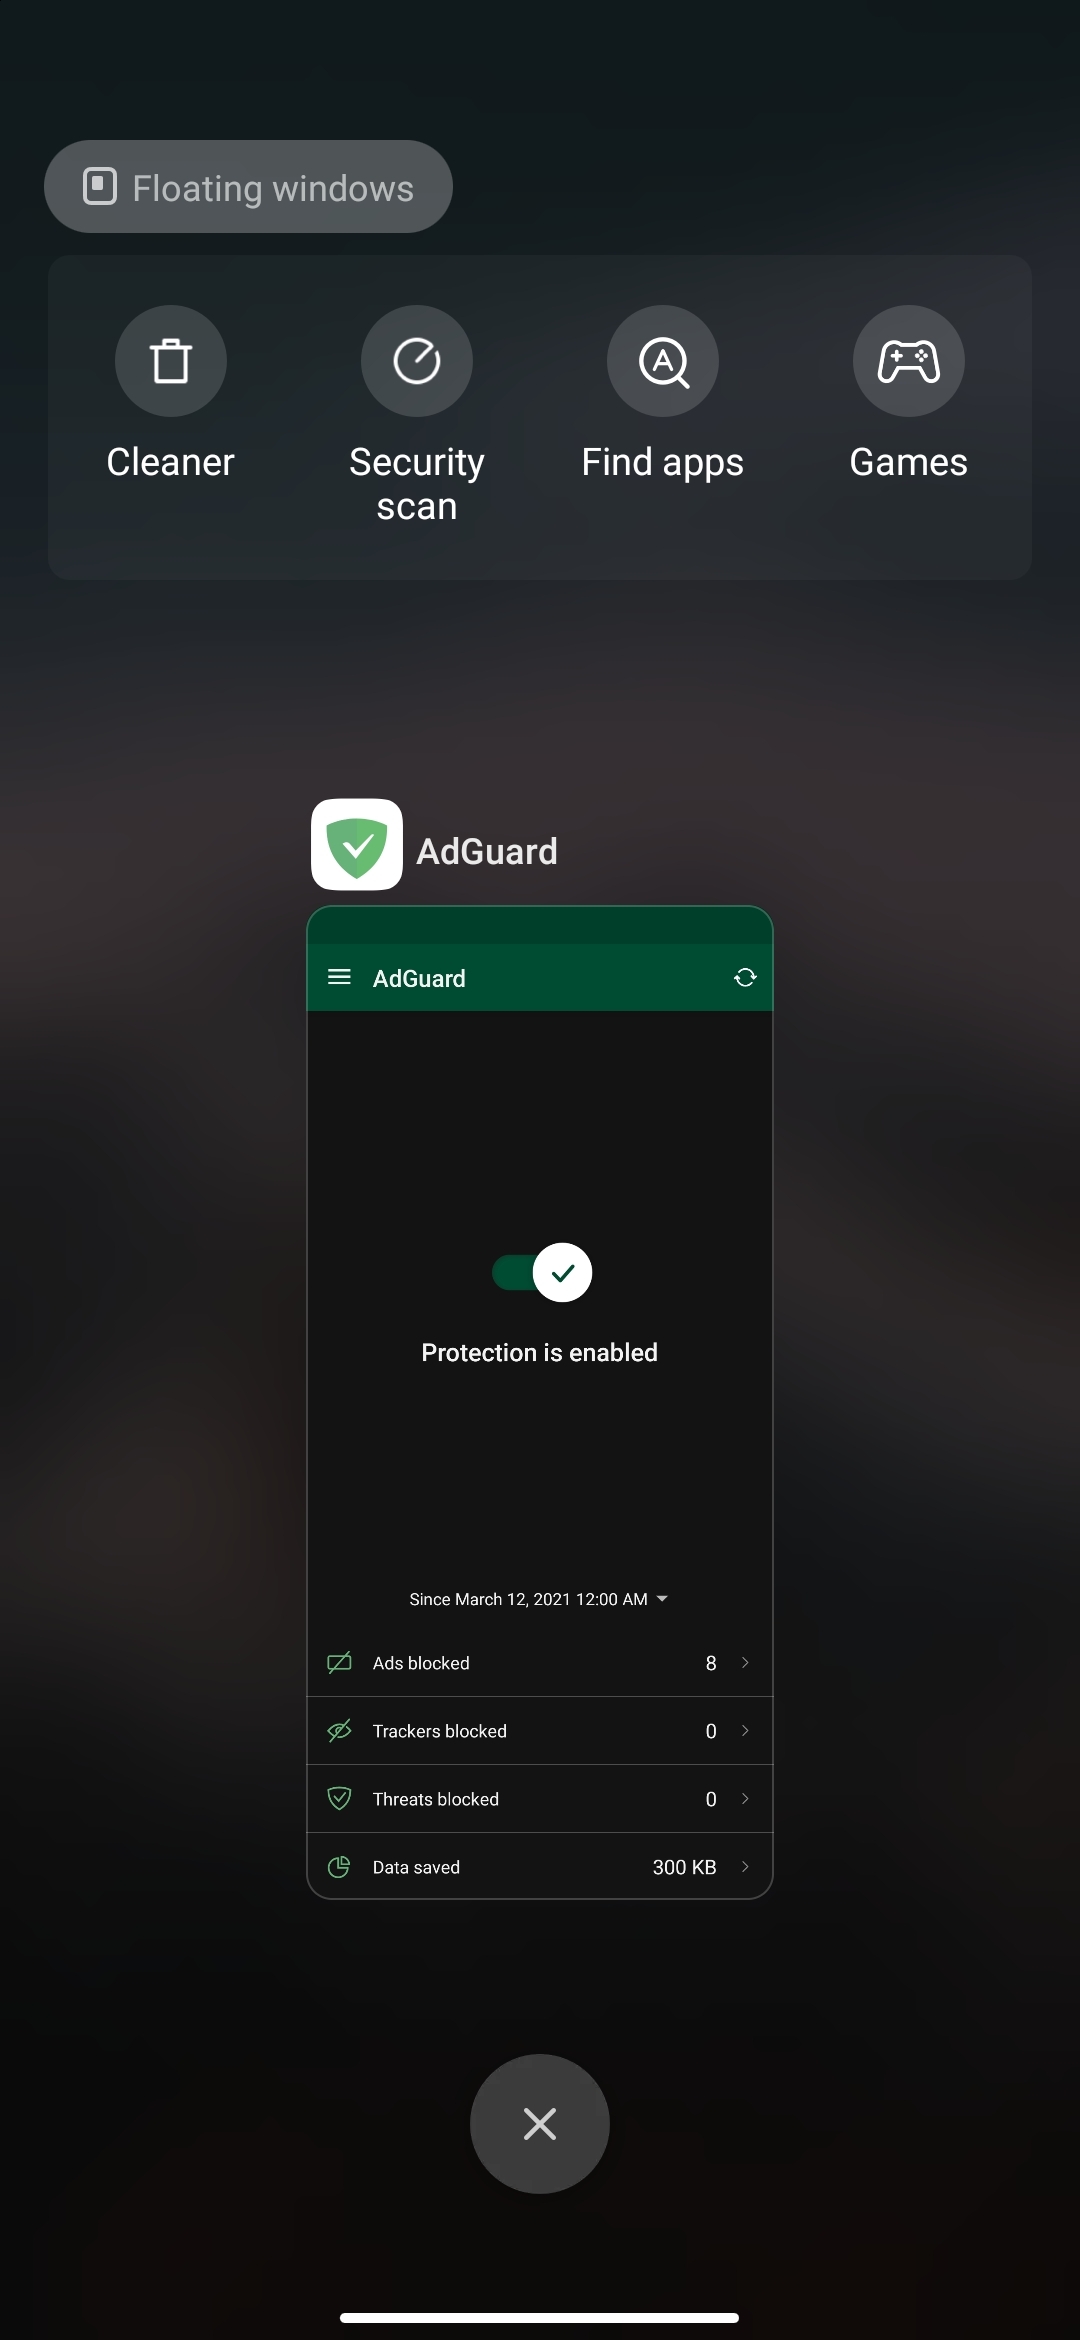 adguard iphone protection is disabled